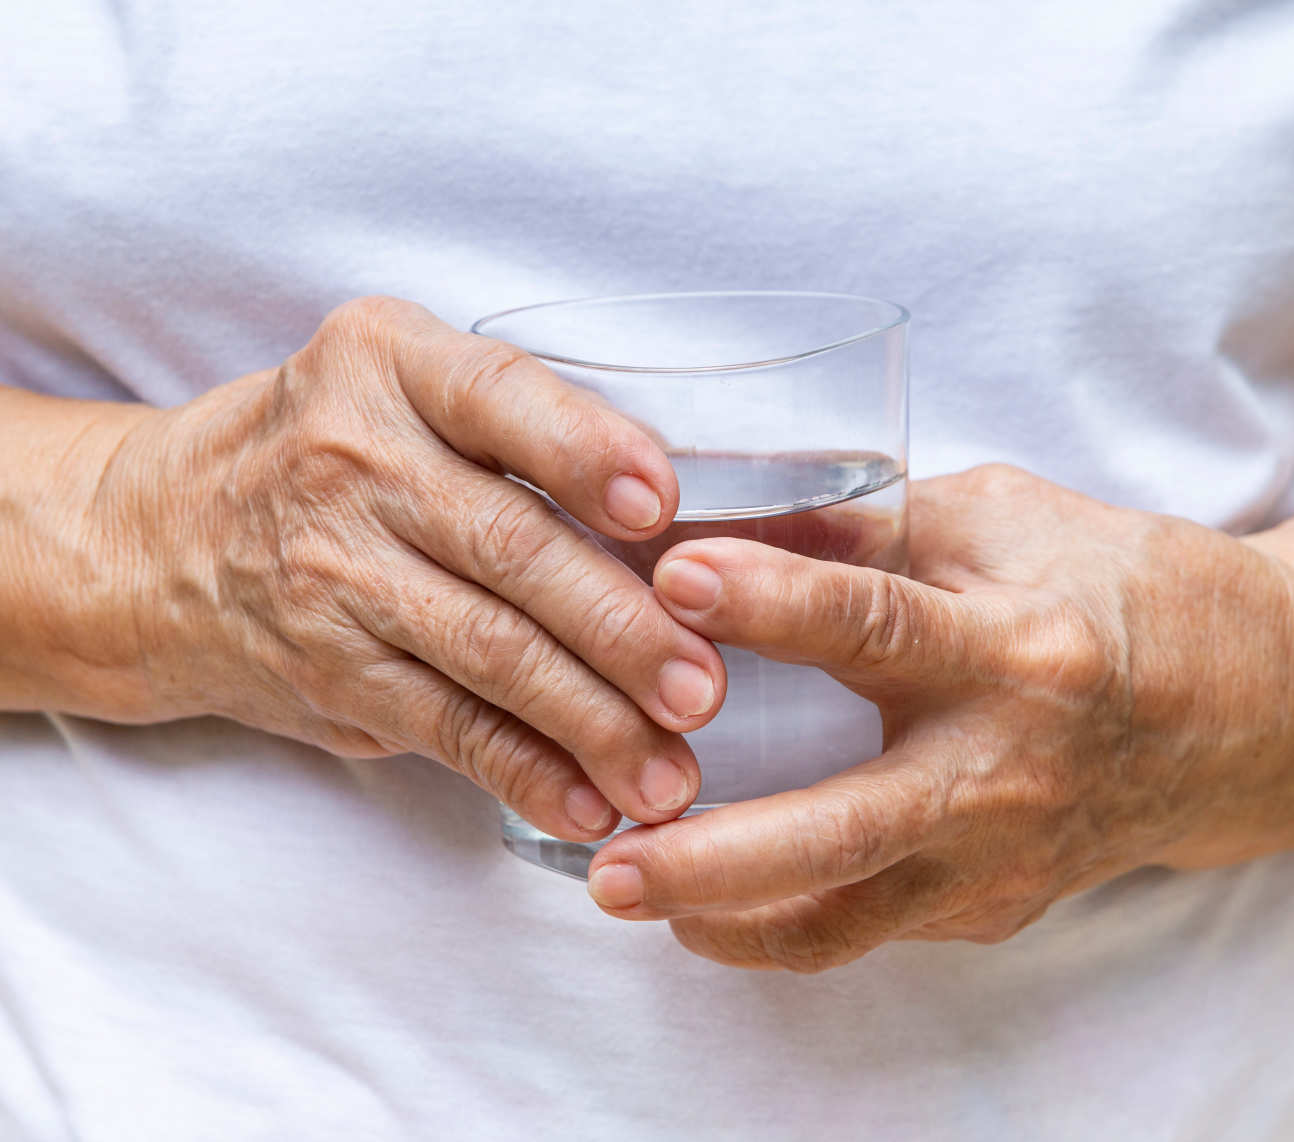 Elderly person's hand holding a glass